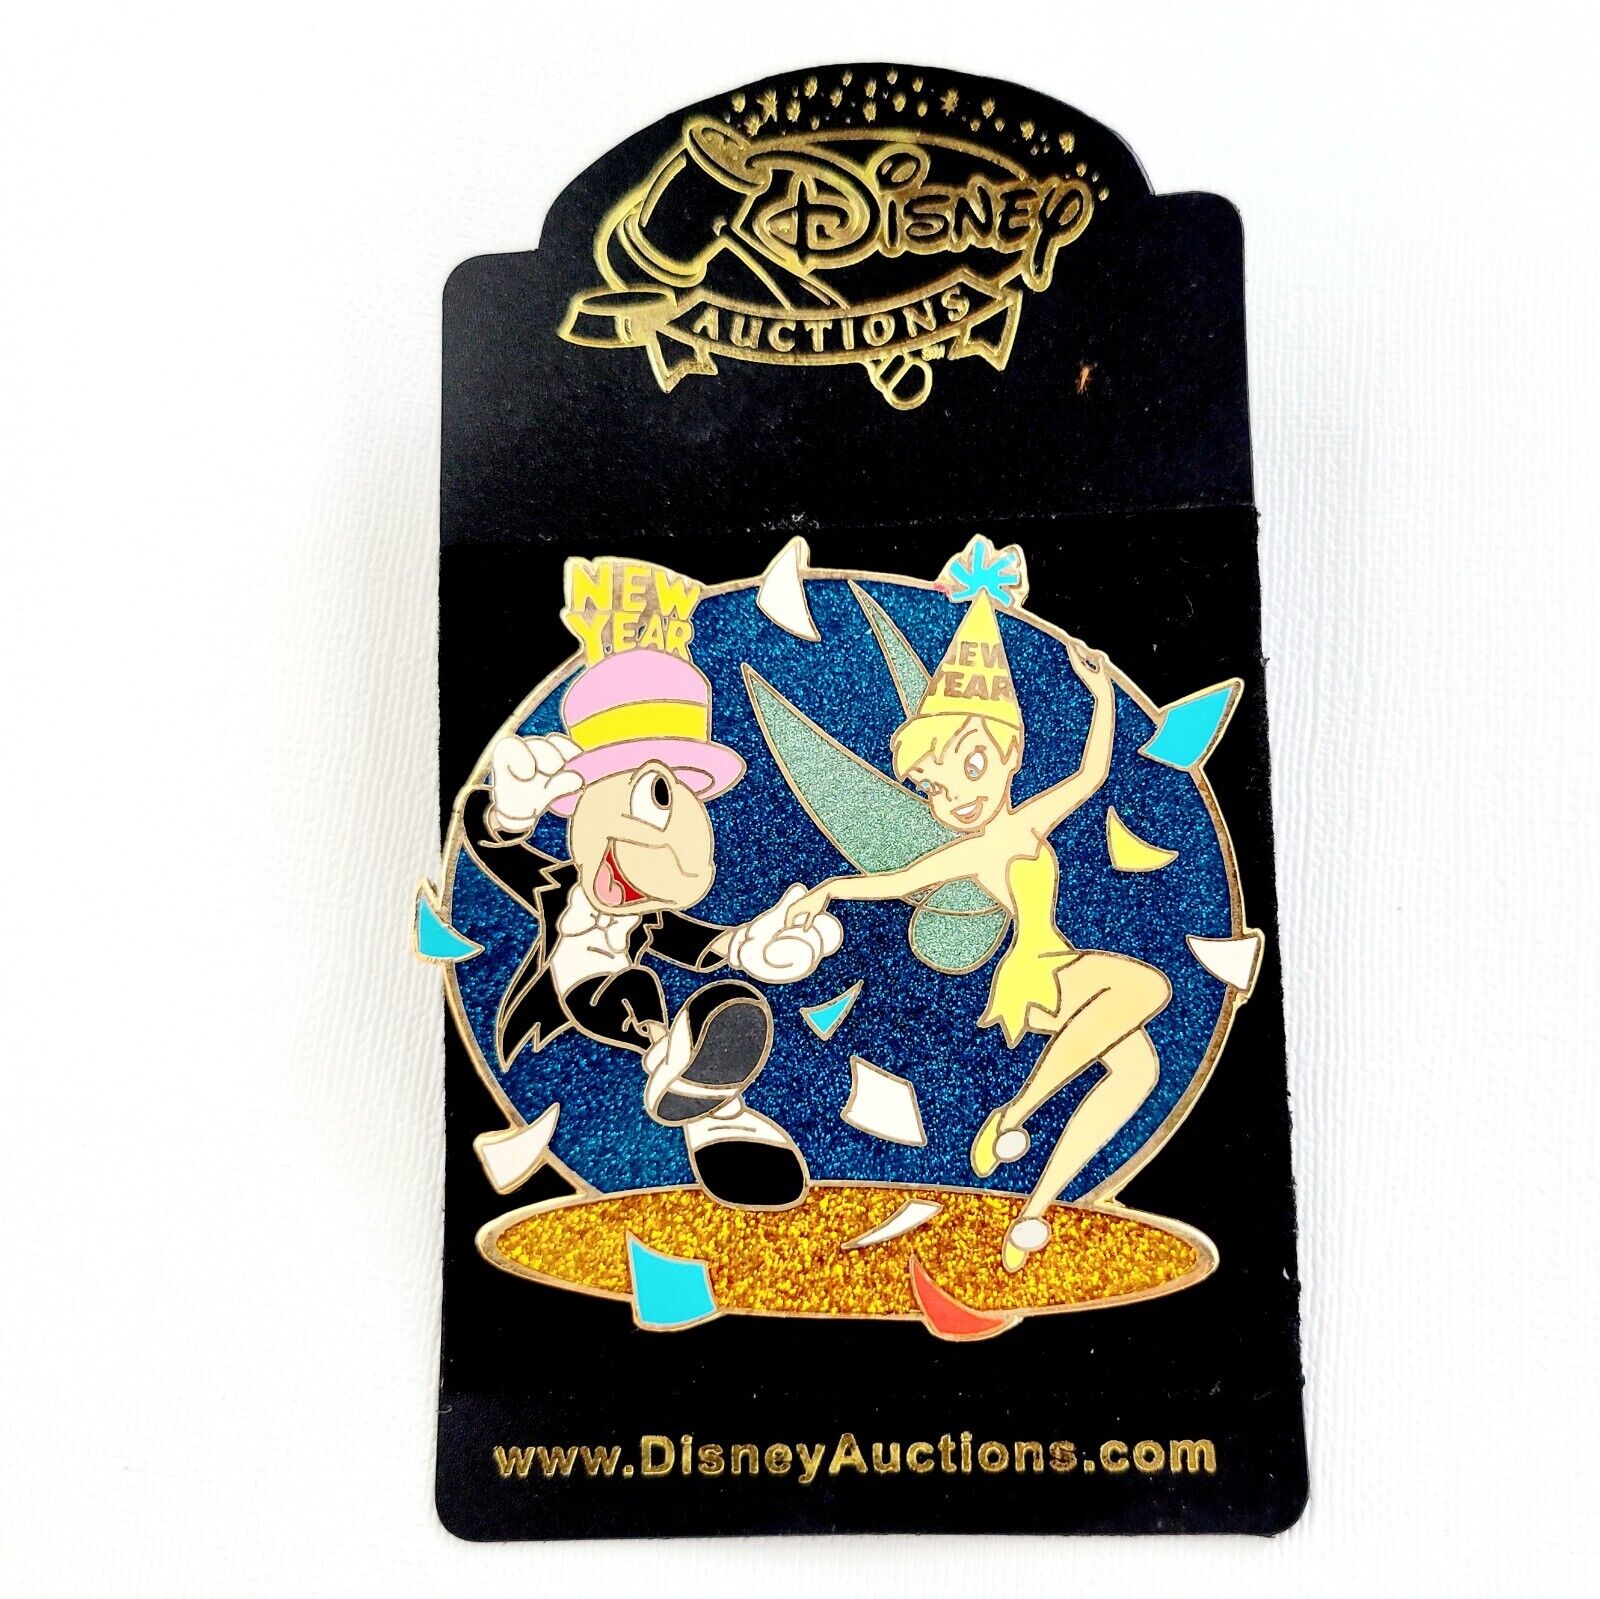 2005 Disney Auctions Jiminy Cricket & Tinker Bell Dancing New Year LE100 Pin